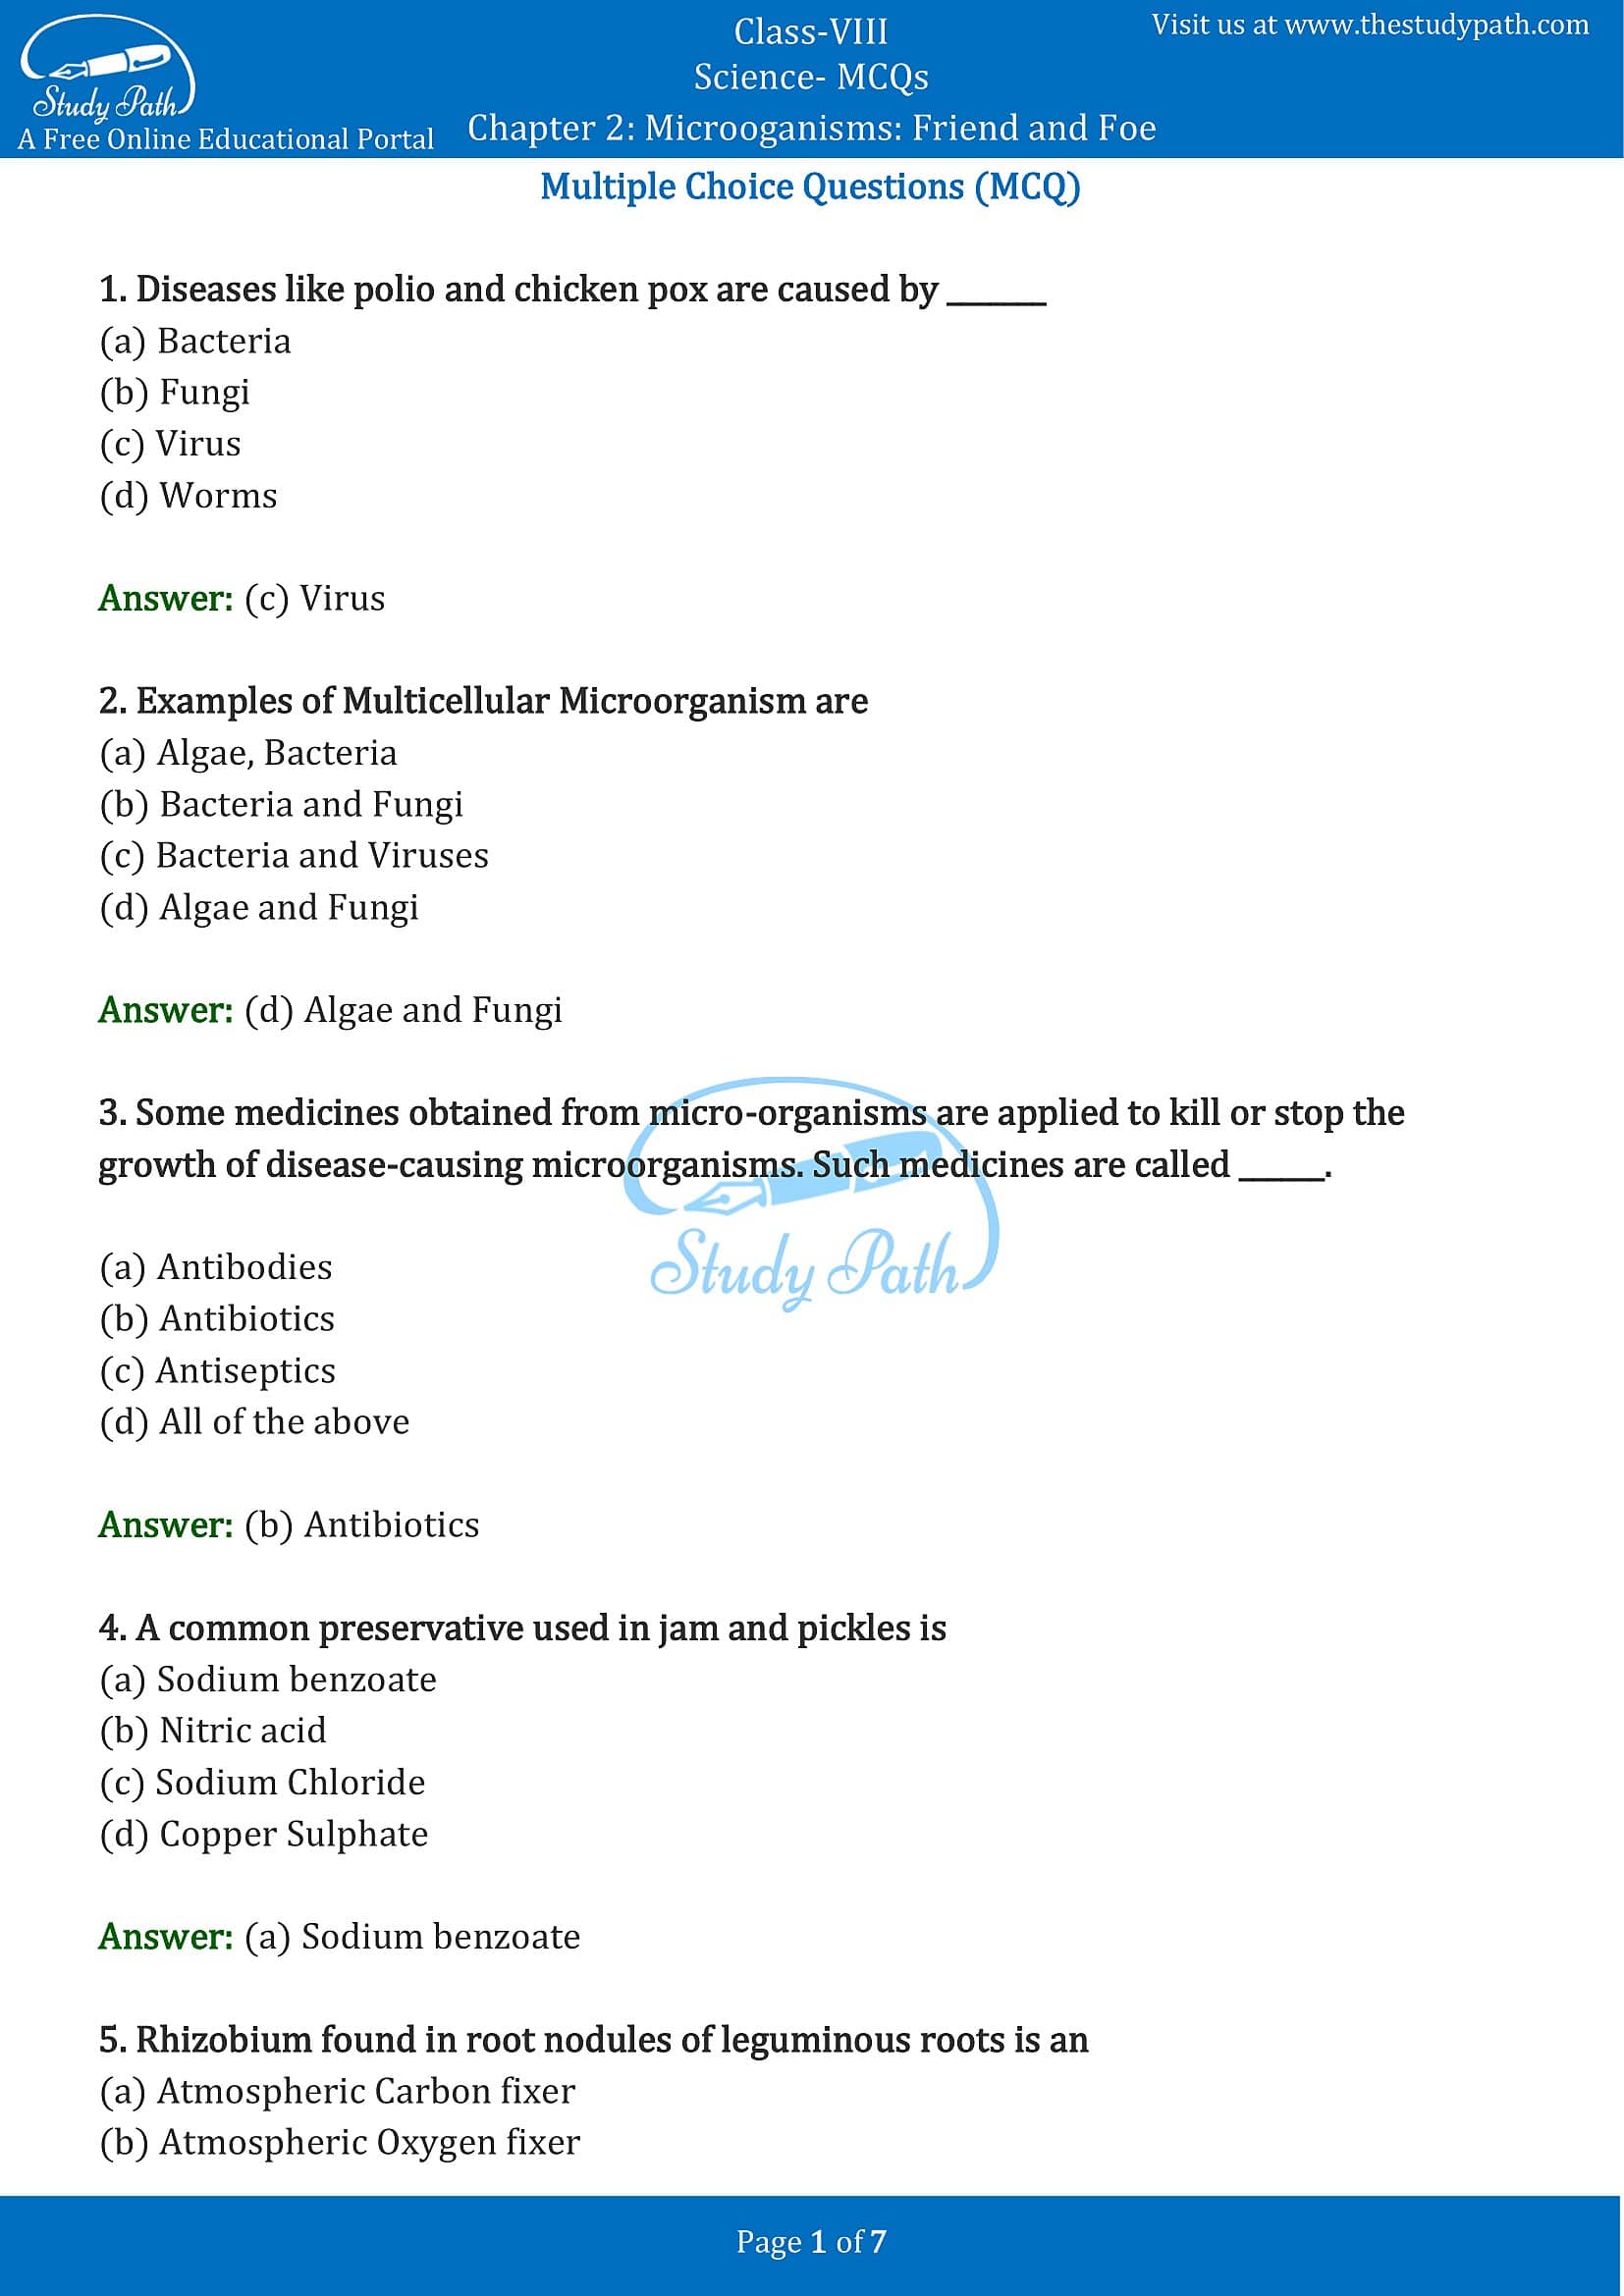 MCQ Questions for Class 8 Science Chapter 2 Microoganisms Friend and Foe with Answers PDF -1